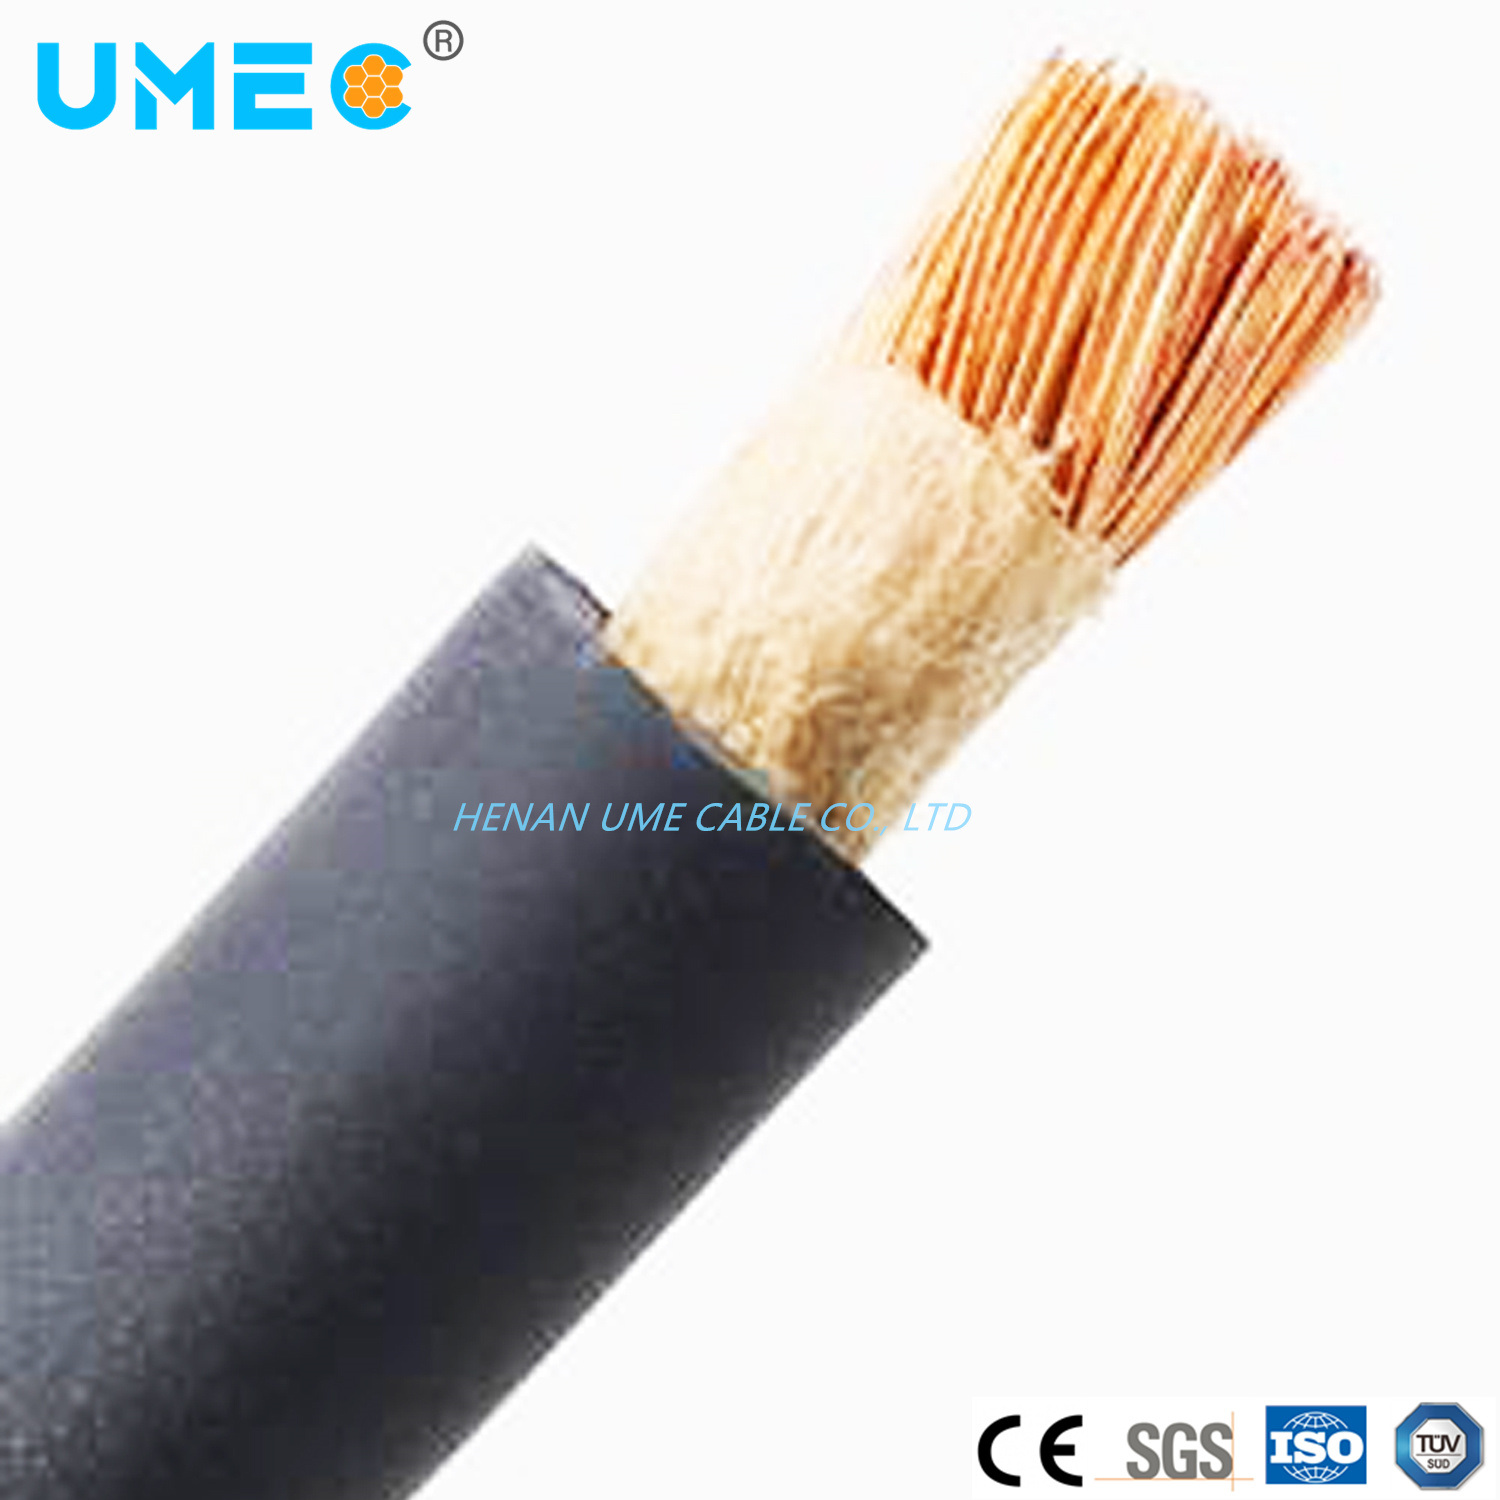 Made in China Rubber Jacket Welding Cable Natural Rubber Sheath Welding Cable Yh Yhf